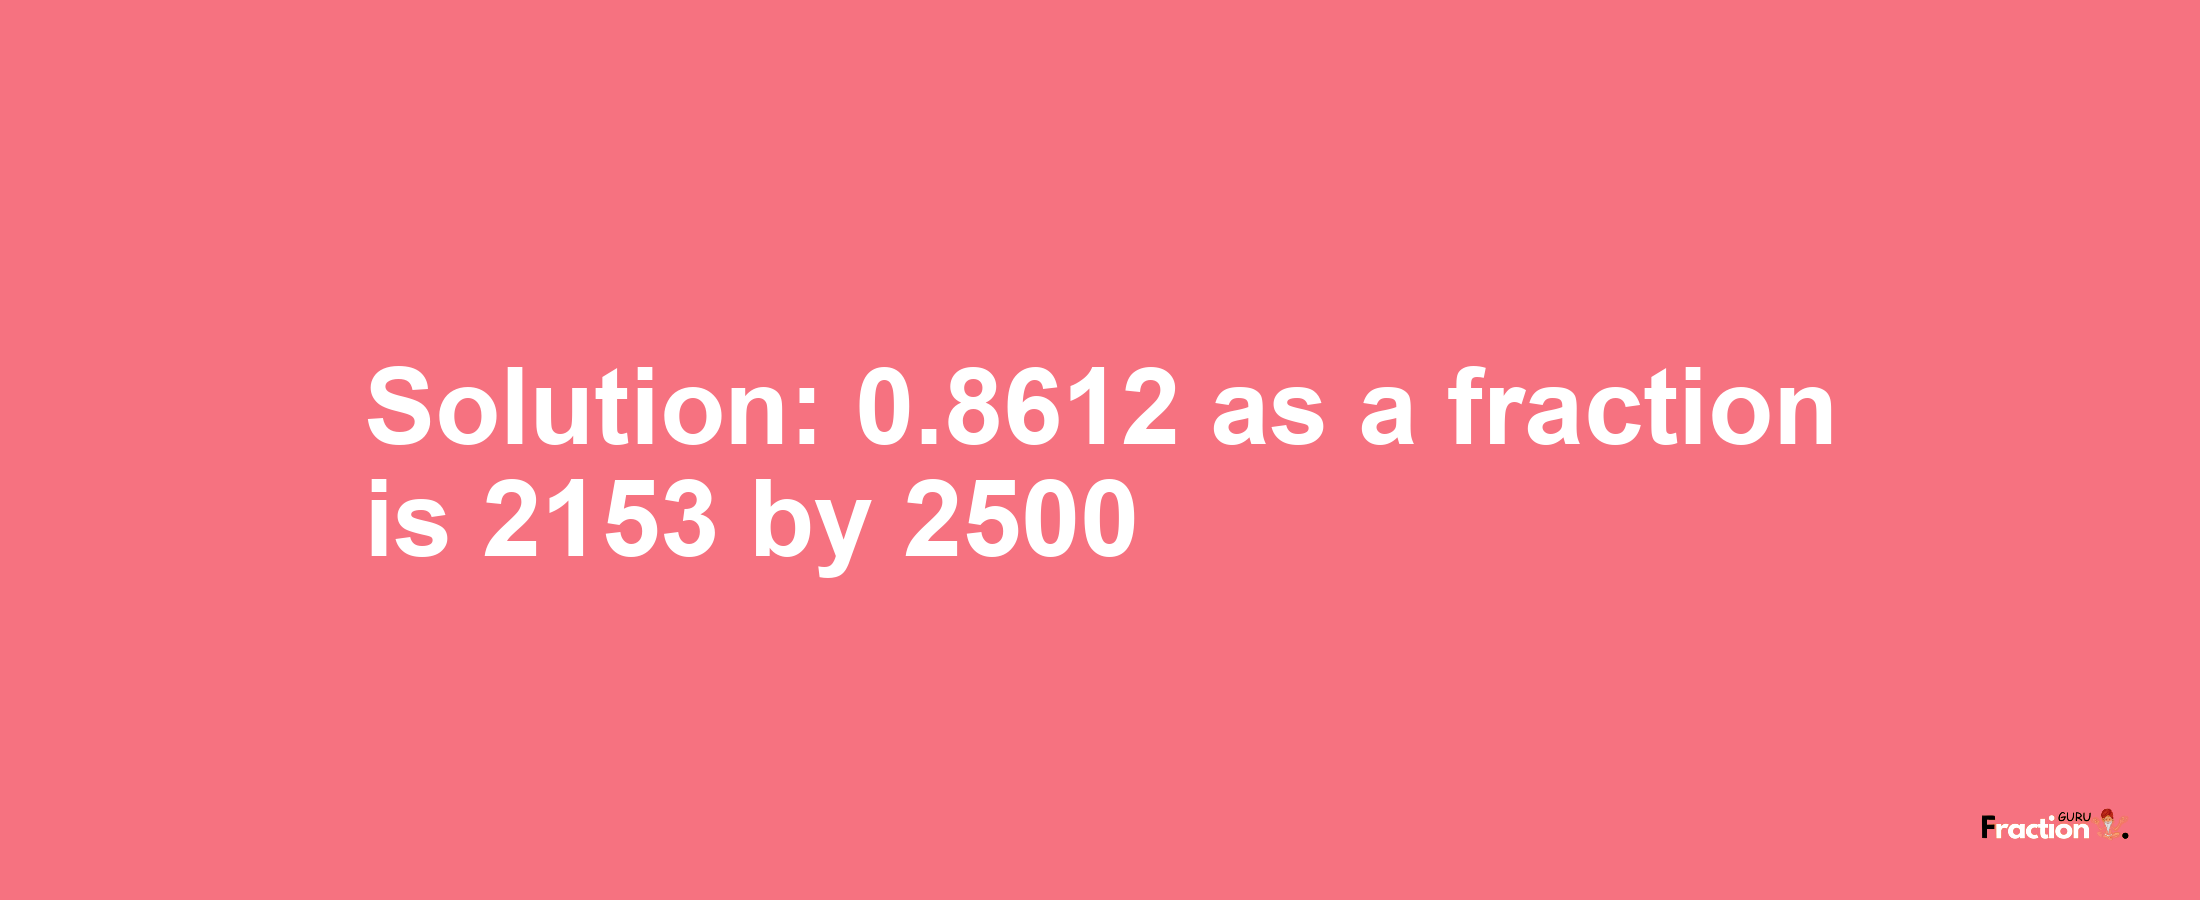 Solution:0.8612 as a fraction is 2153/2500